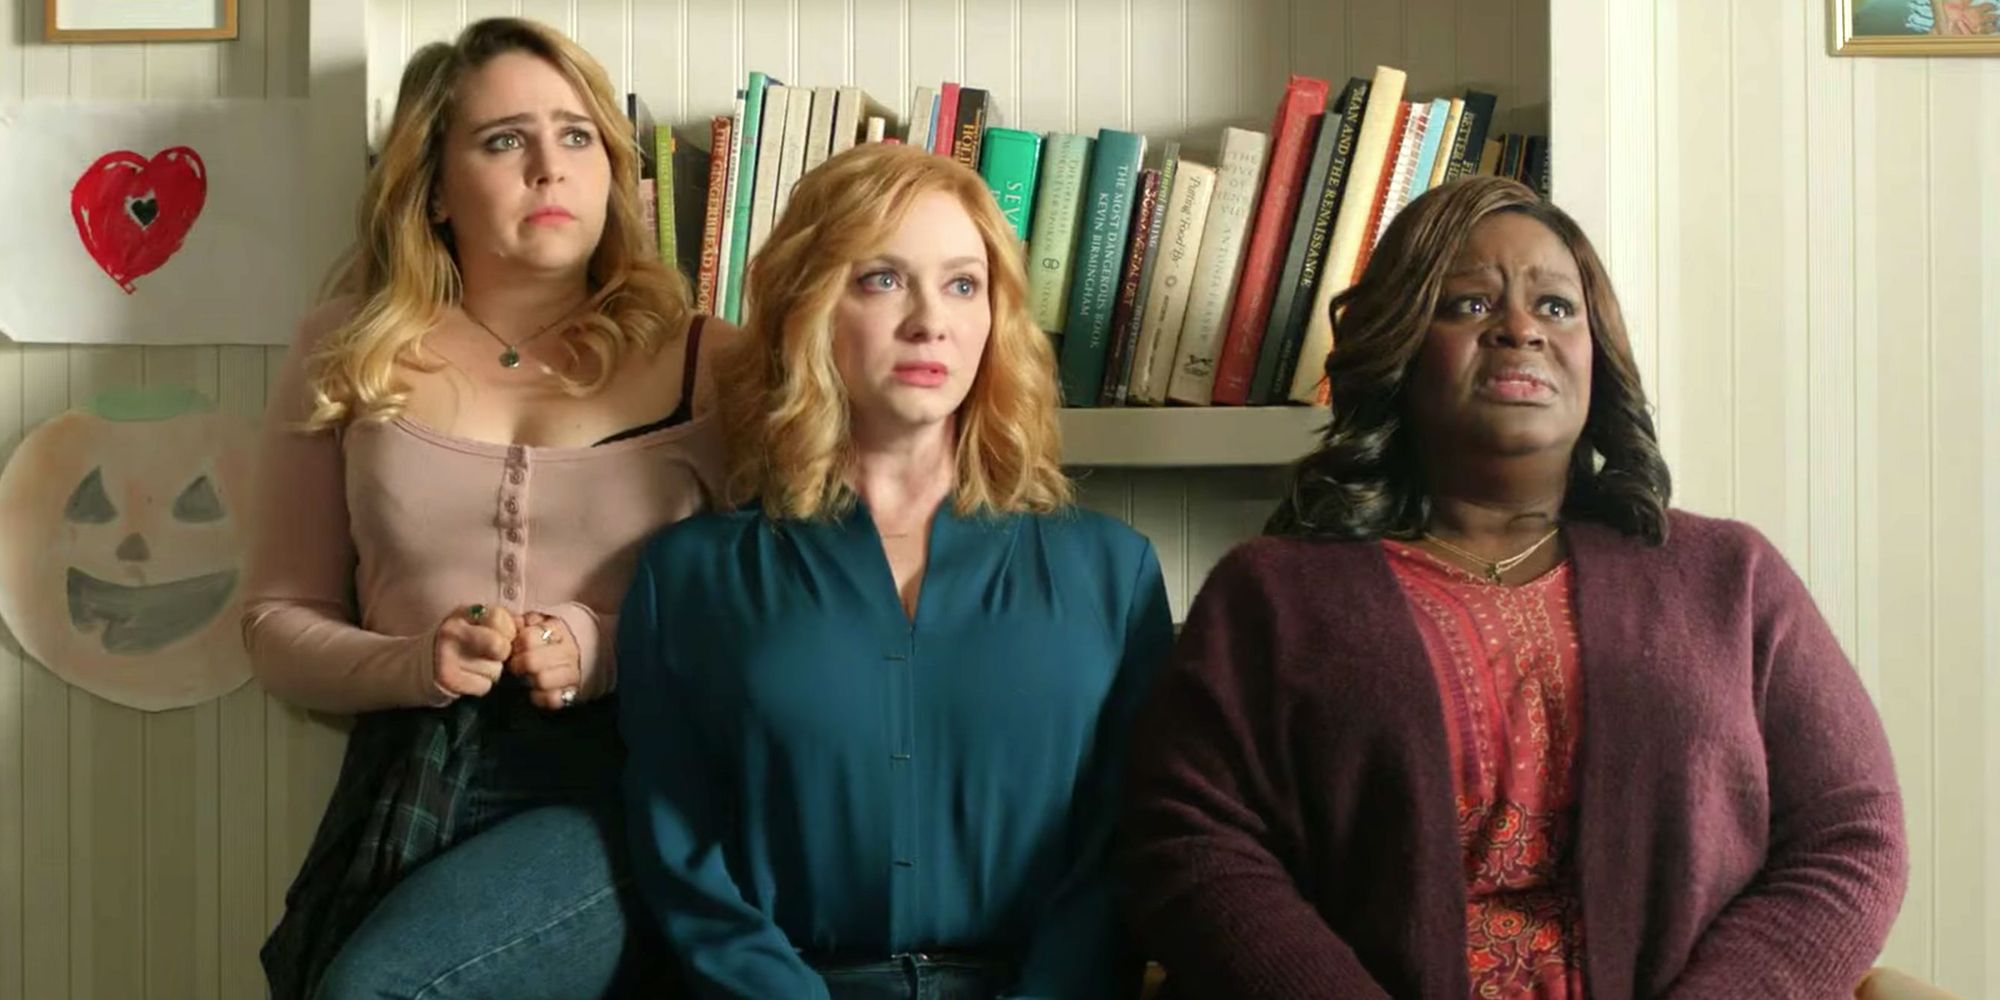 The main characters of Good Girls standing together and looking confused.